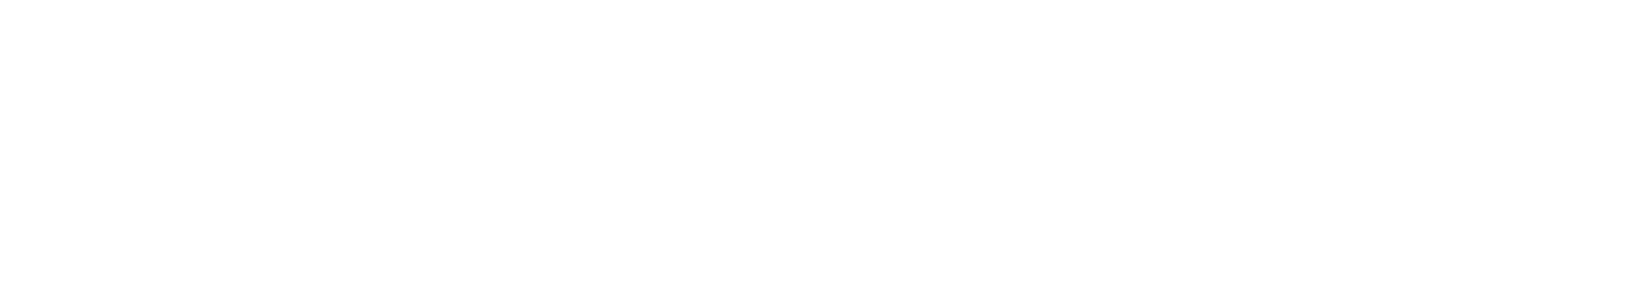 	Join a board and create change